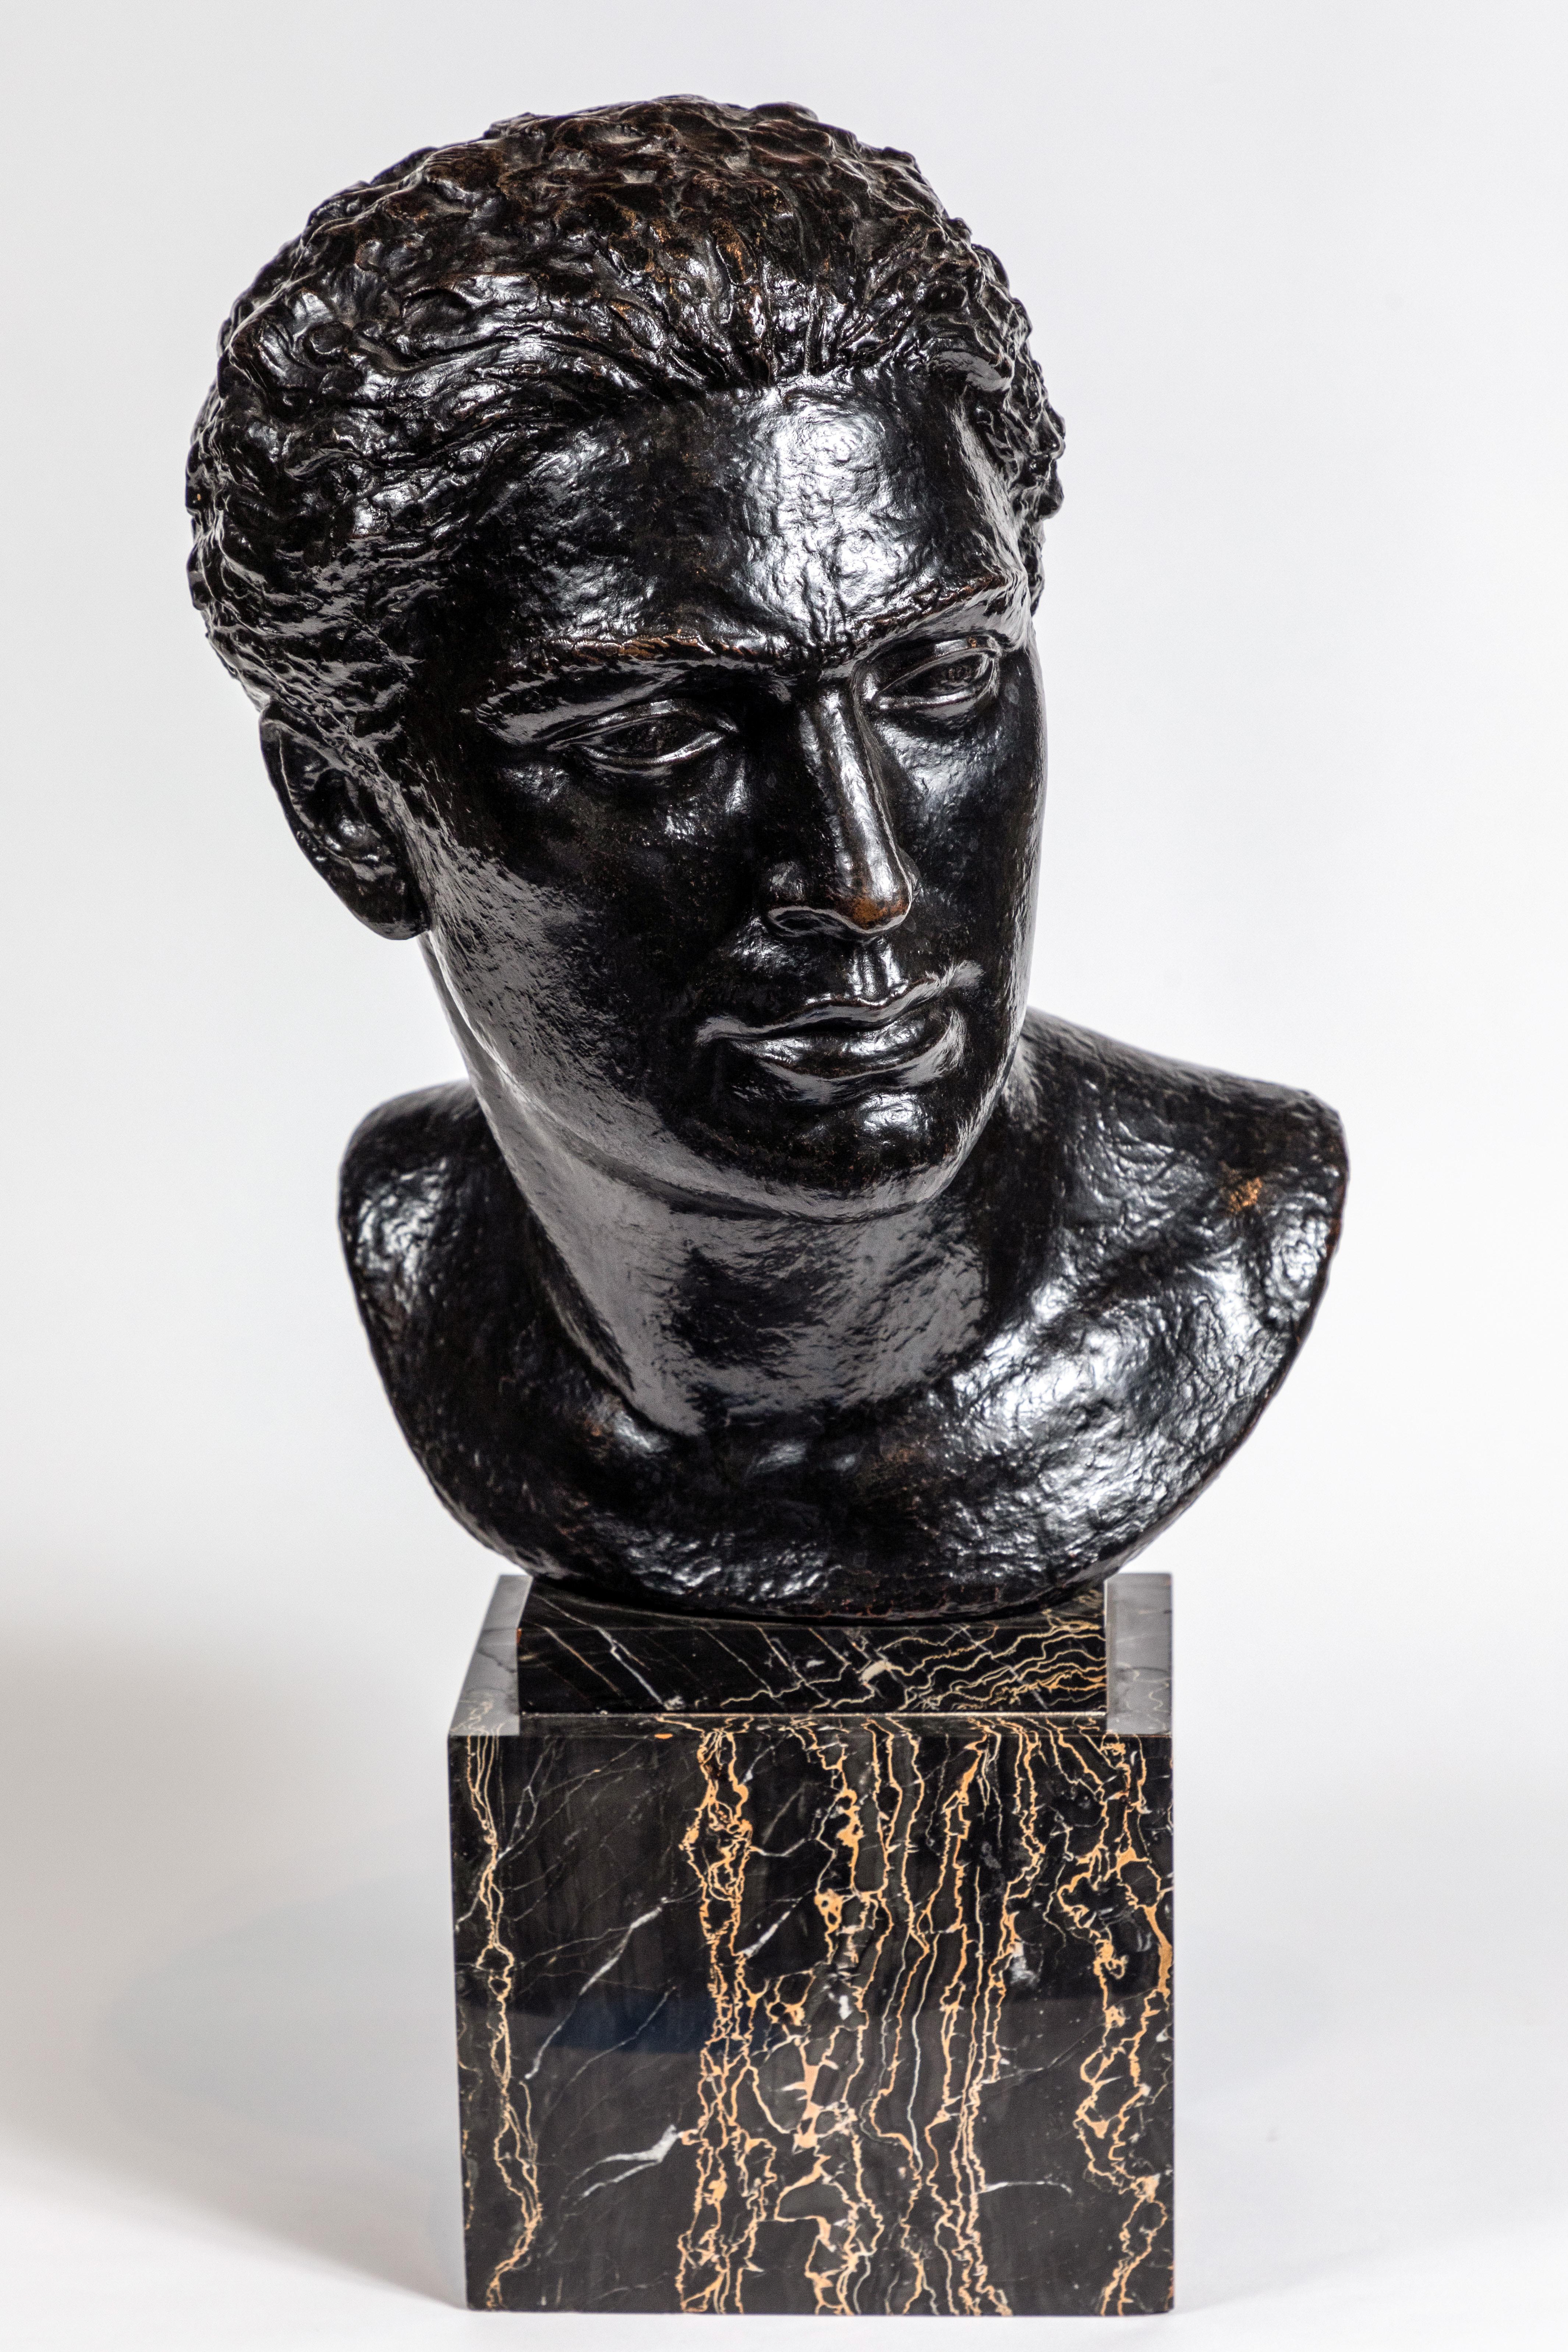 Large, midcentury, cast bronze bust of a man mounted on a chic, veined, polished marble base of the same period.